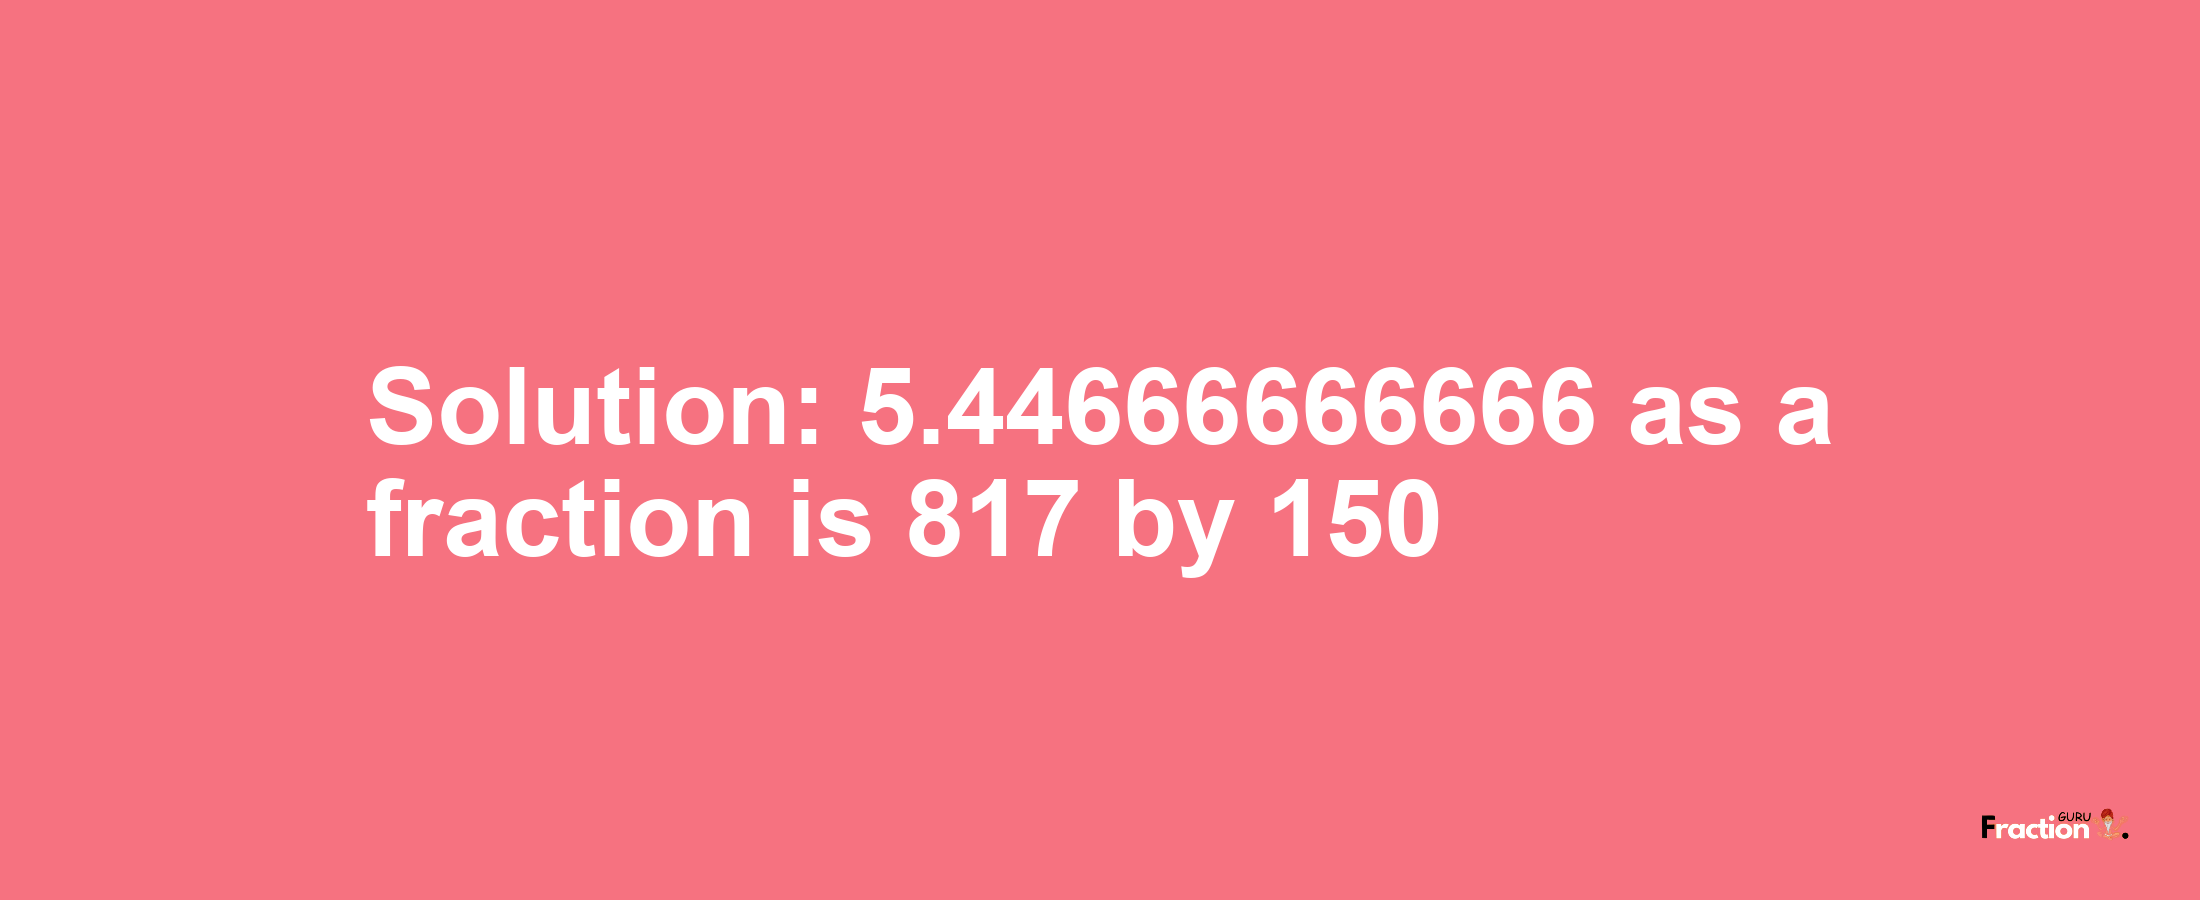 Solution:5.44666666666 as a fraction is 817/150